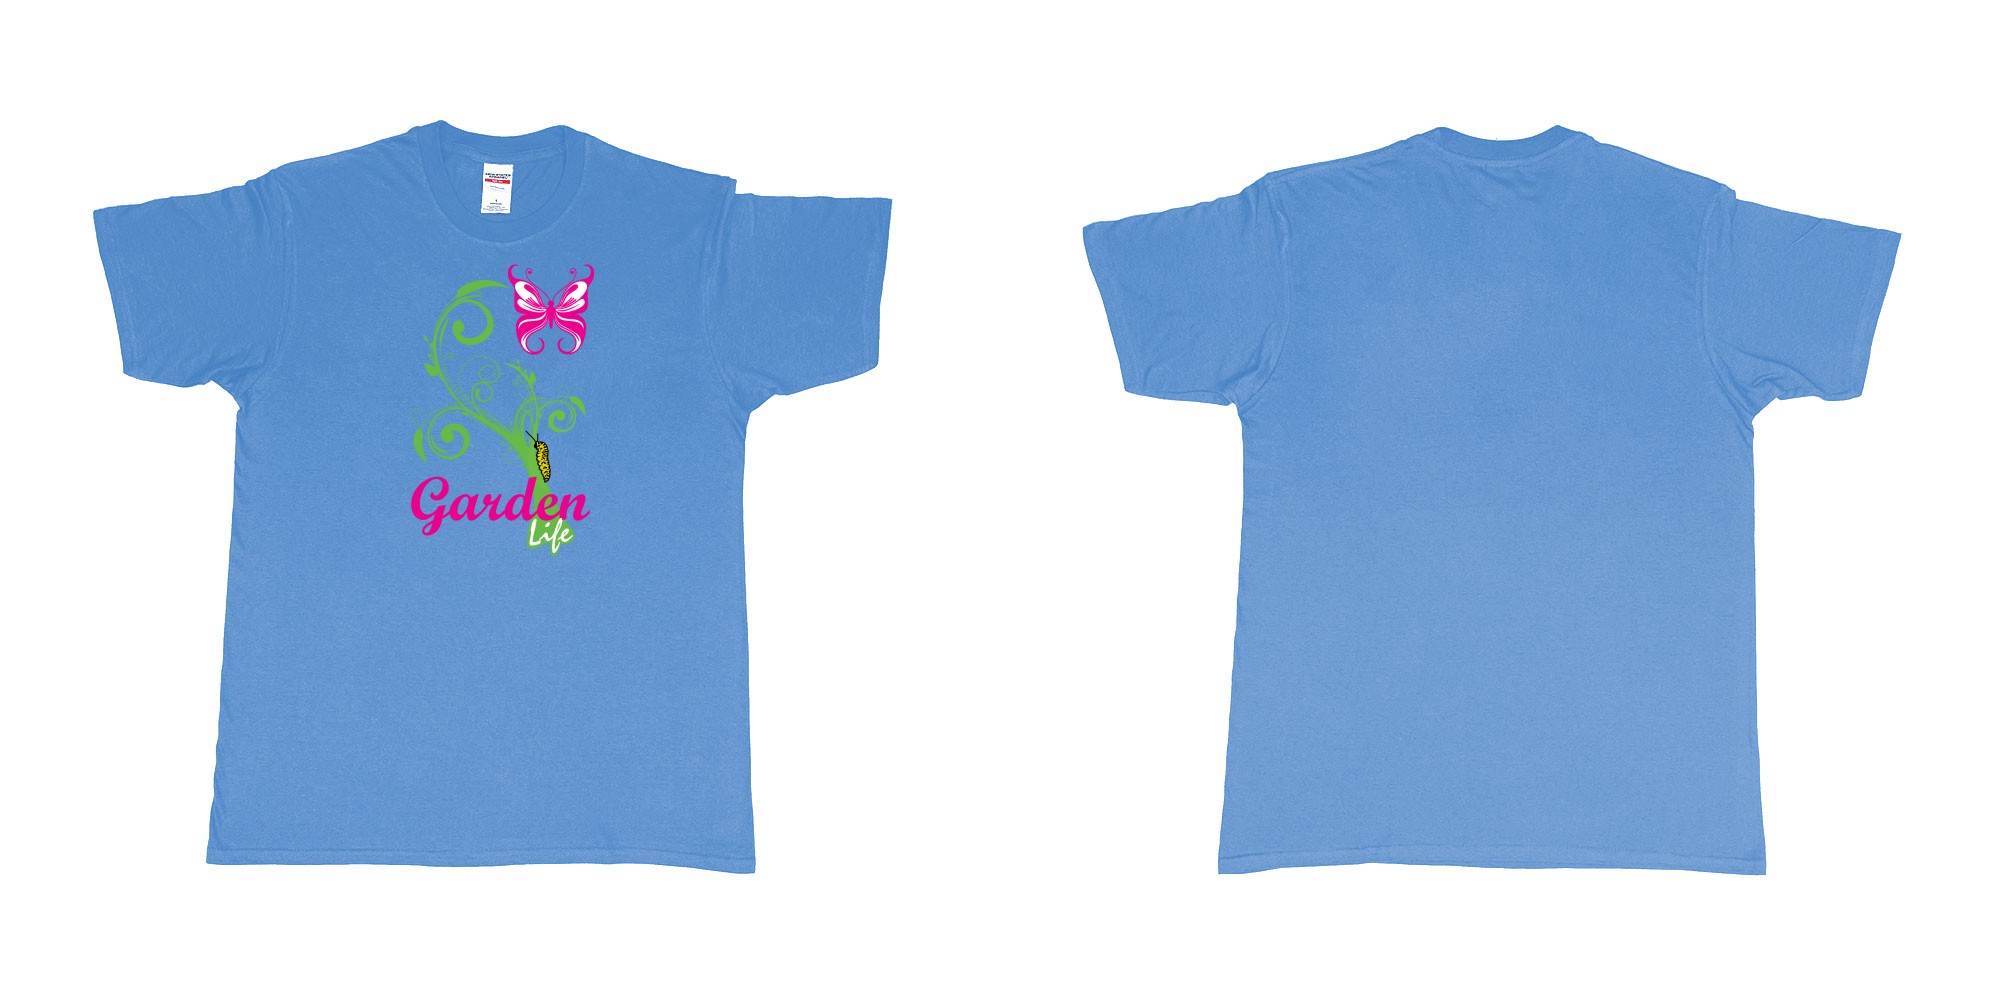 Custom tshirt design garden life transformation from a caterpillar and a butterfly in fabric color carolina-blue choice your own text made in Bali by The Pirate Way